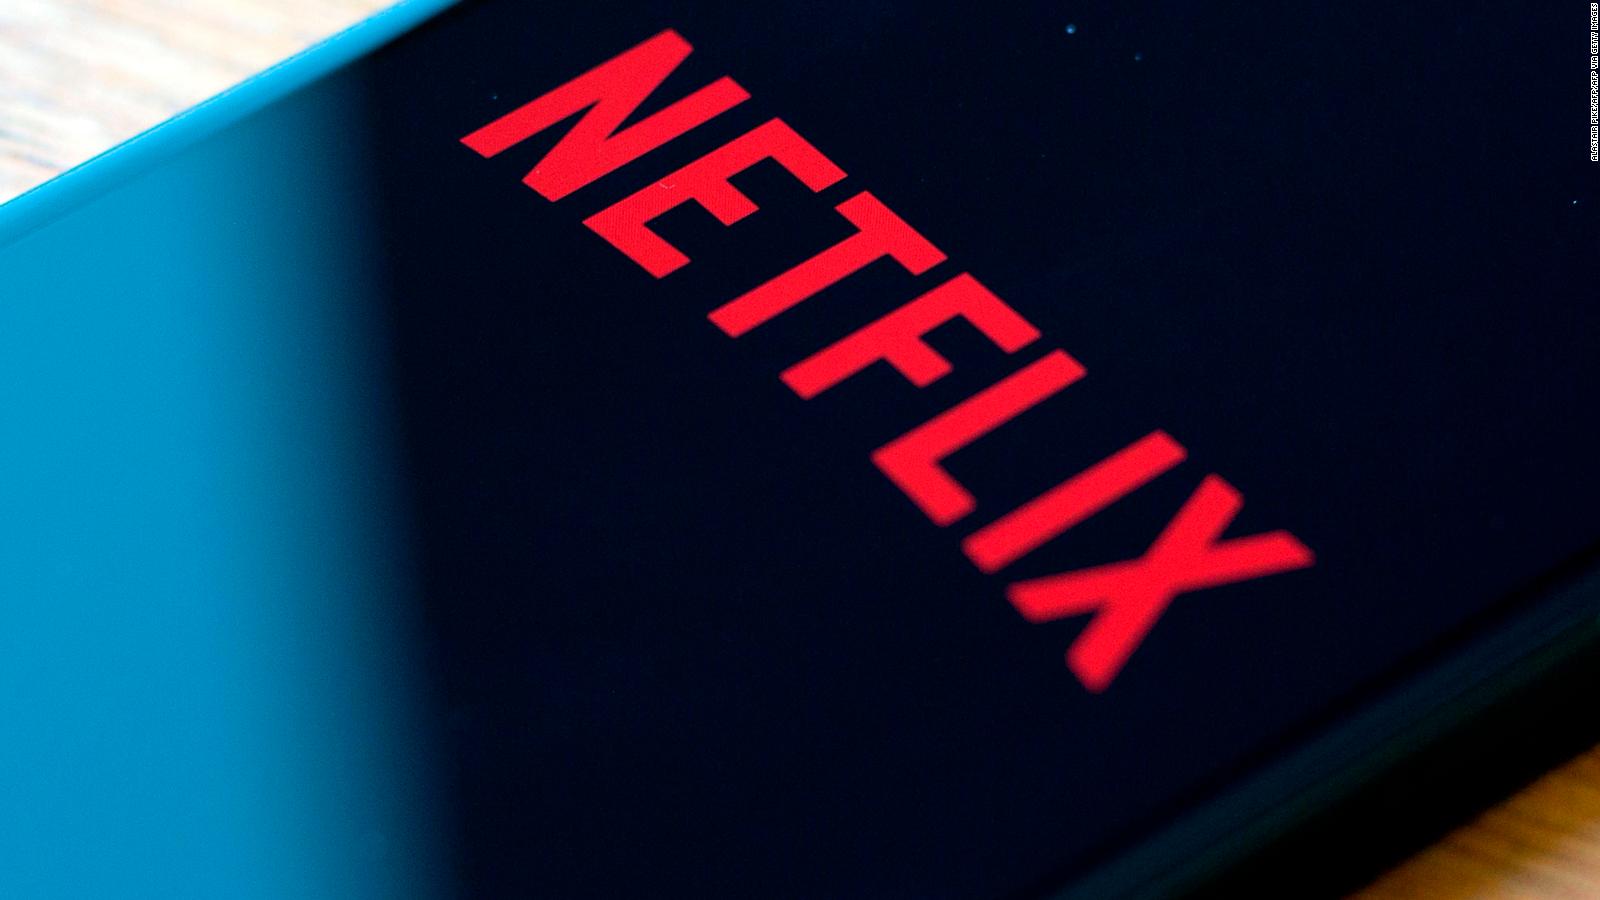 Why did Netflix increase its prices in the US and Canada?